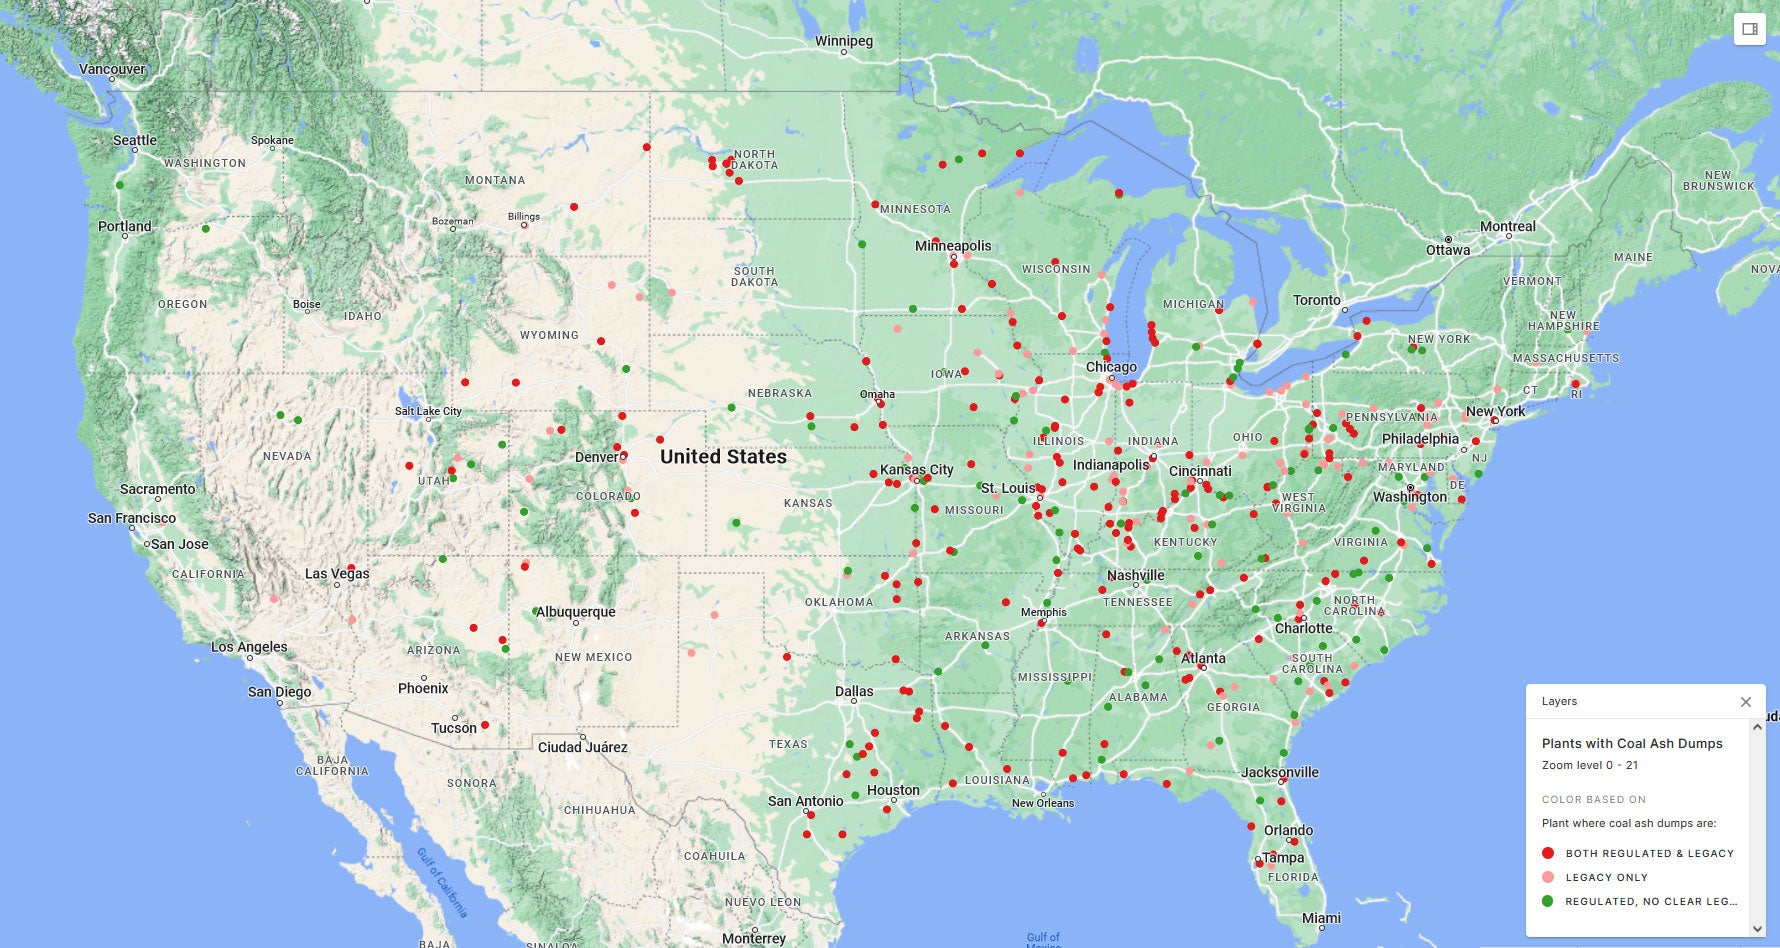 Map of coal ash dump sites across the United States.